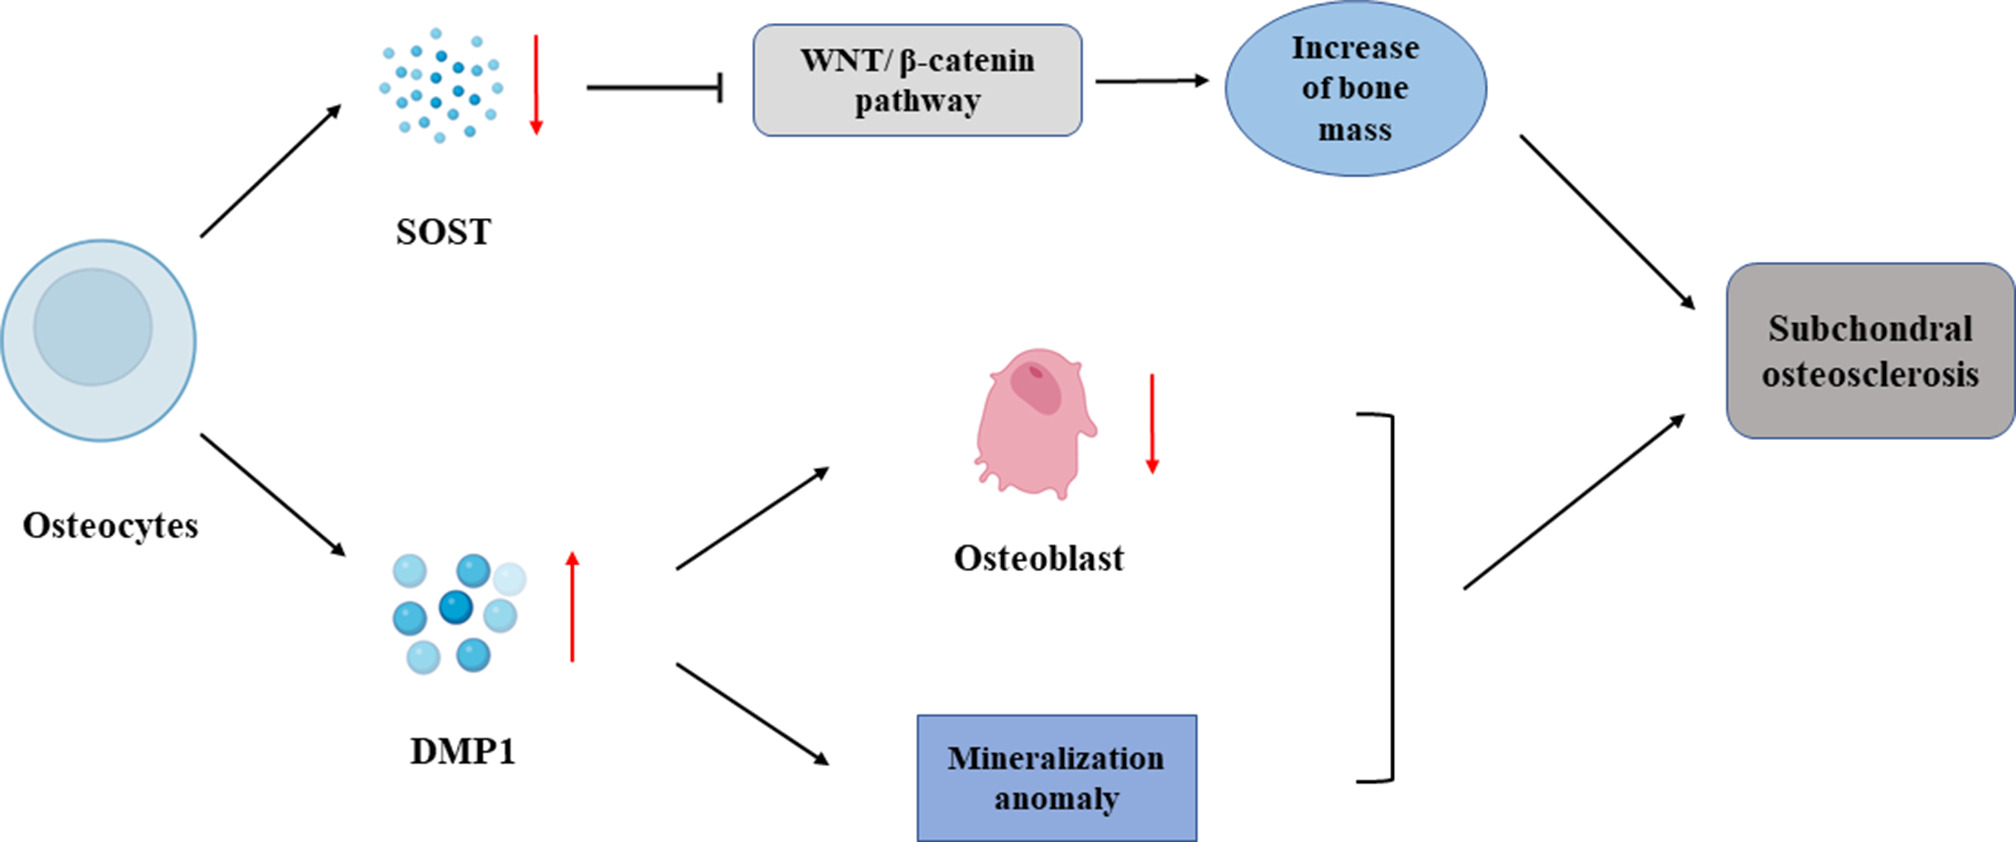 Fig. 3 
            The role of osteocytes in subchondral bone in osteoarthritis (OA). In OA, the expression of sclerostin (SOST) in subchondral bone decreased, while the expression of dentin matrix protein-1 (DMP1) increased. SOST reached the bone surface through the lacunocanalicular network, where it inhibits the classical Wnt/β-catenin signal transduction of osteoblasts and regulates bone mass. The increased expression of DMP1 can lead to mineralization disorder and significantly delay osteoblast differentiation.
          